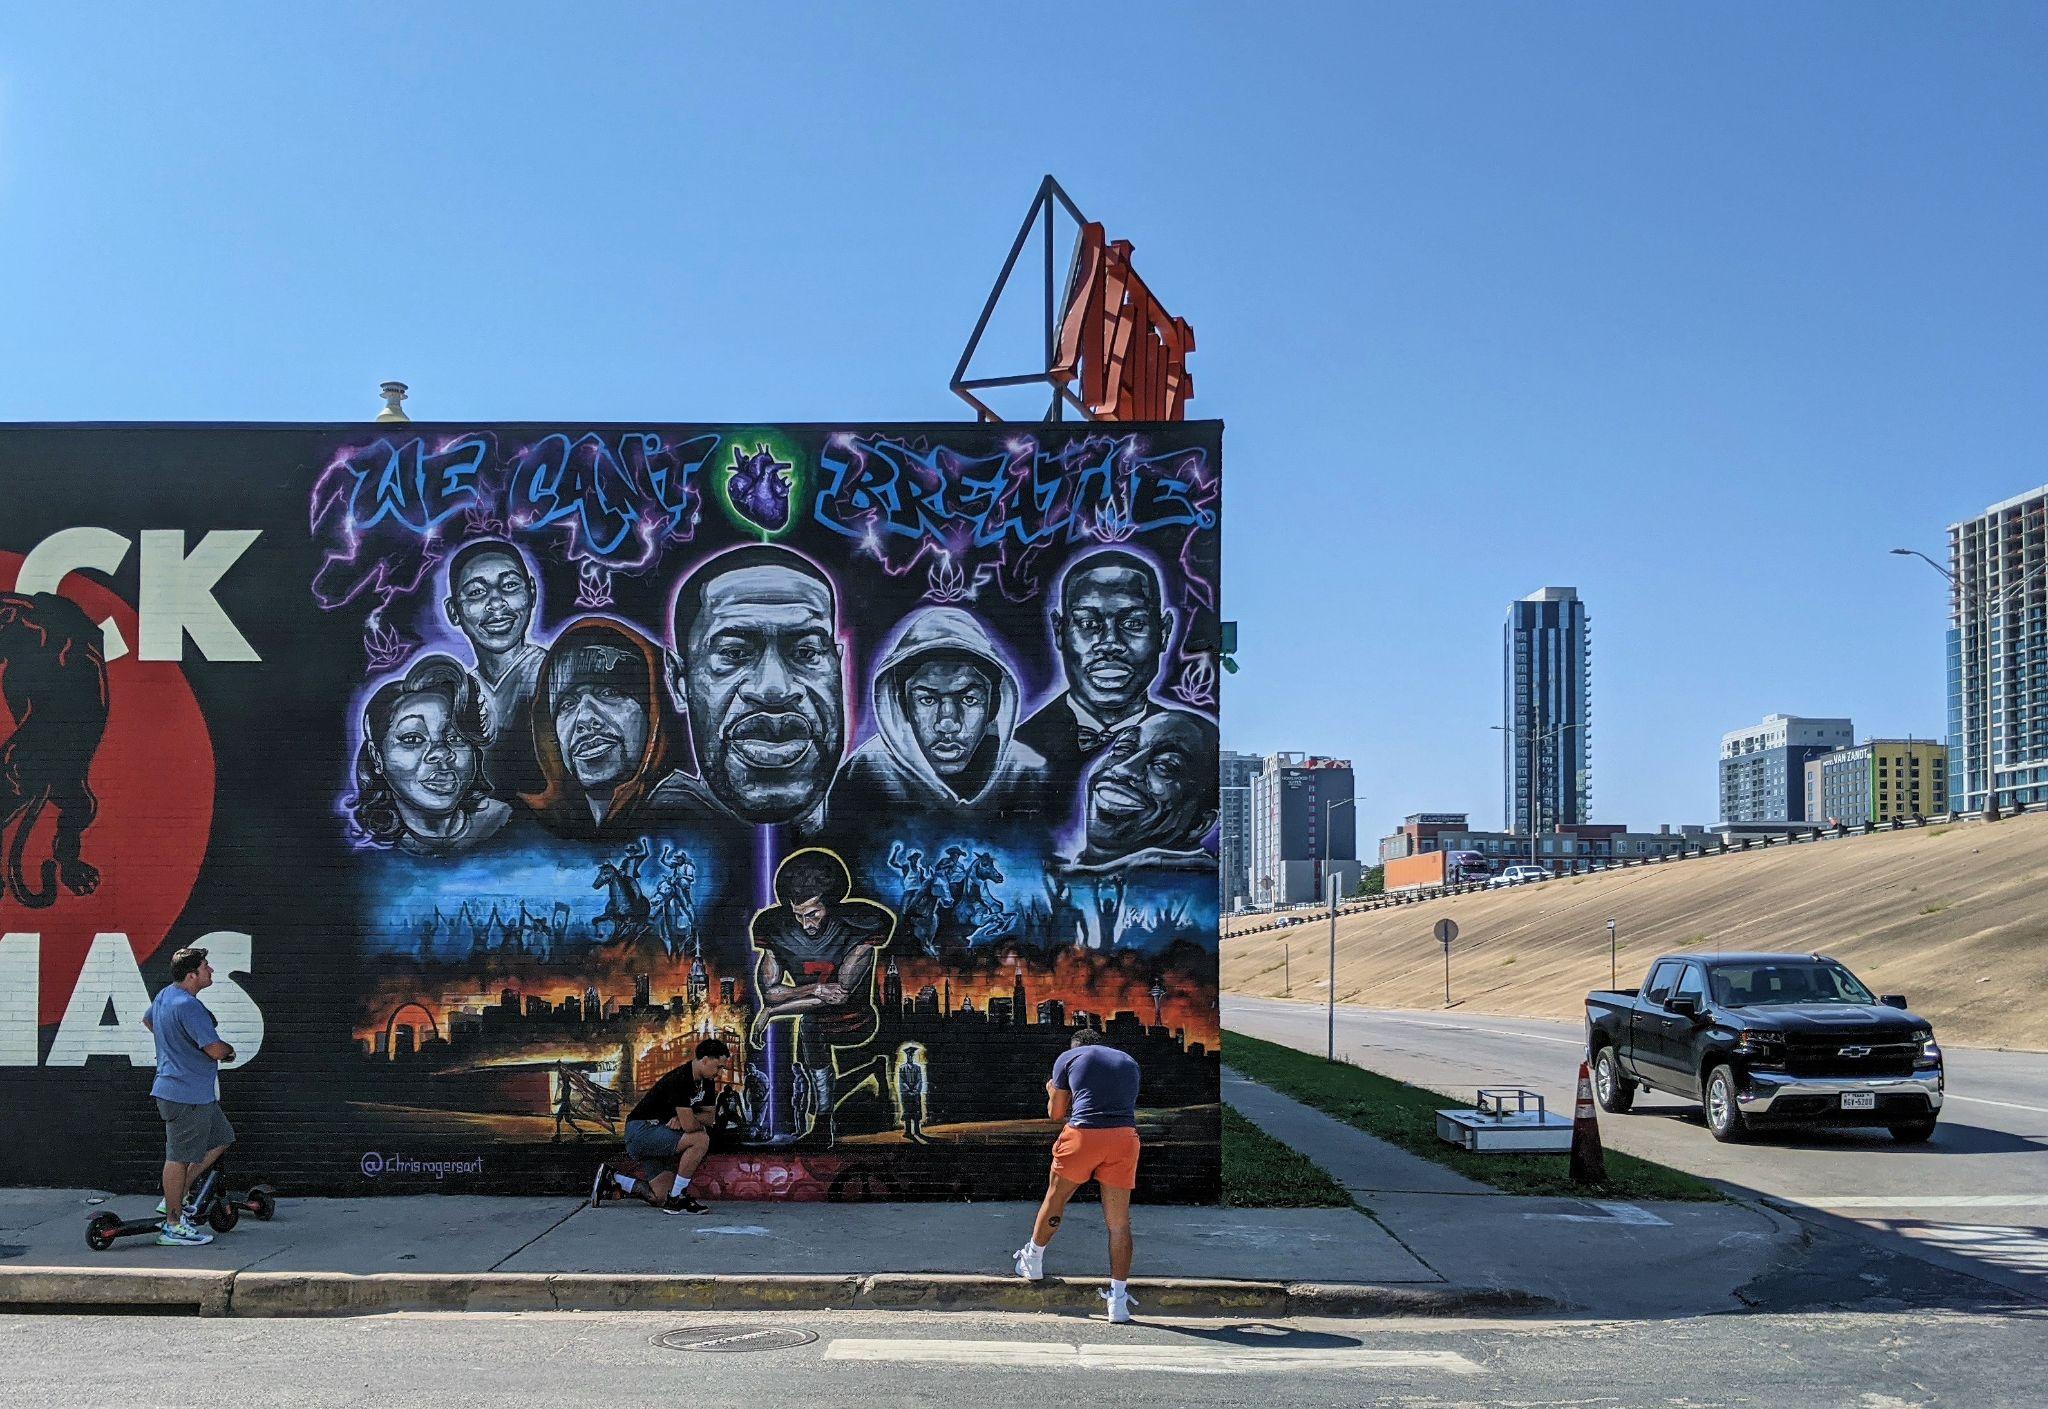 Photograph of a mural in Austin, Texas, that depicts Colin Kaepernick kneeling in front of images of George Floyd, Ahmaud Arbery, Eric Garner, Tamir Rice, Trayvon Martin, Breonna Taylor, and Mike Ramos.